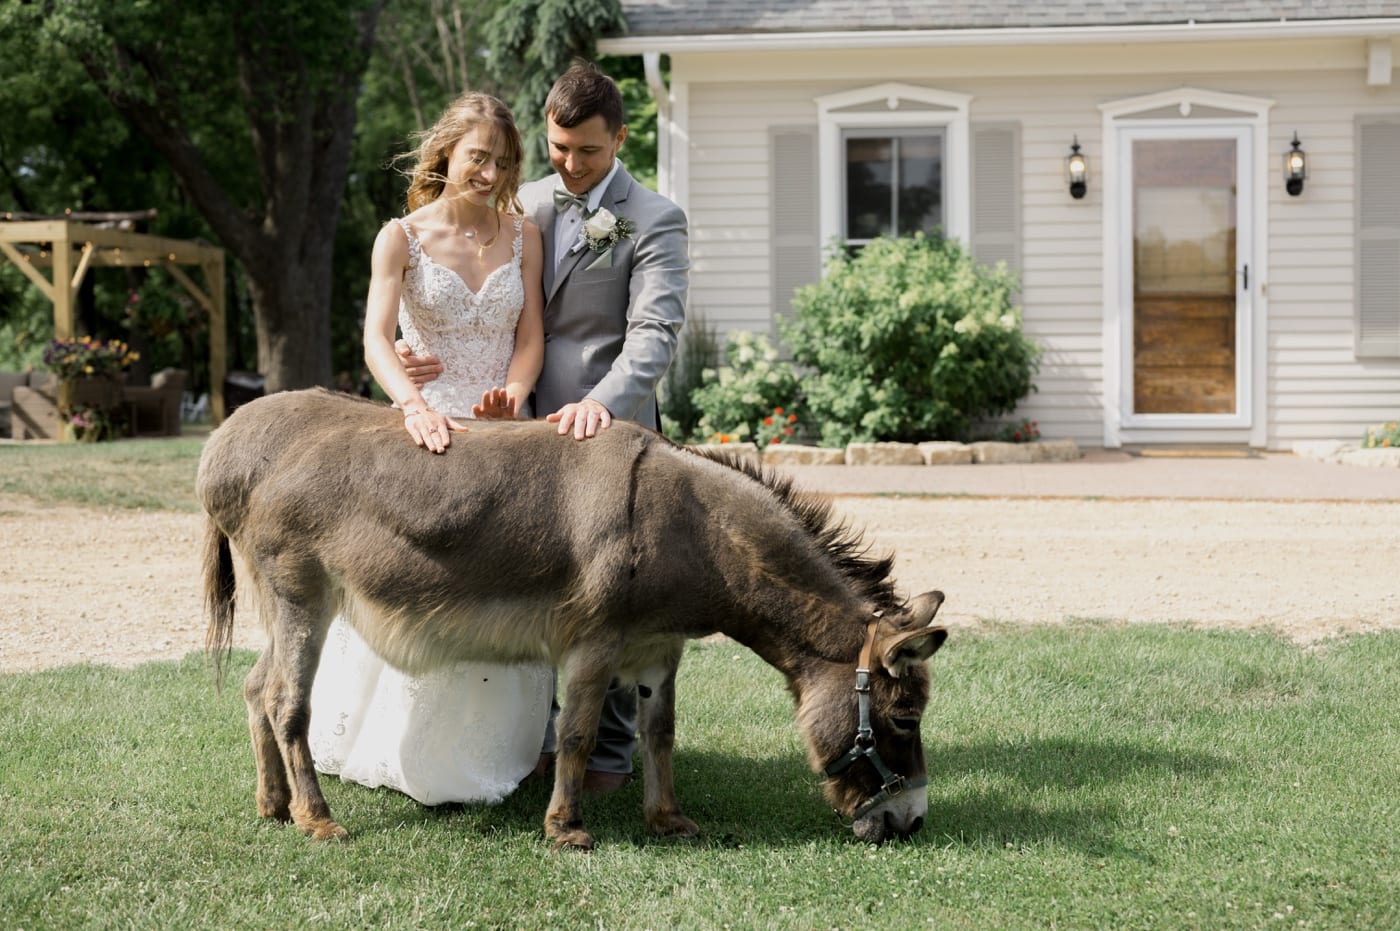 bride and groom with donkey apple river il wedding